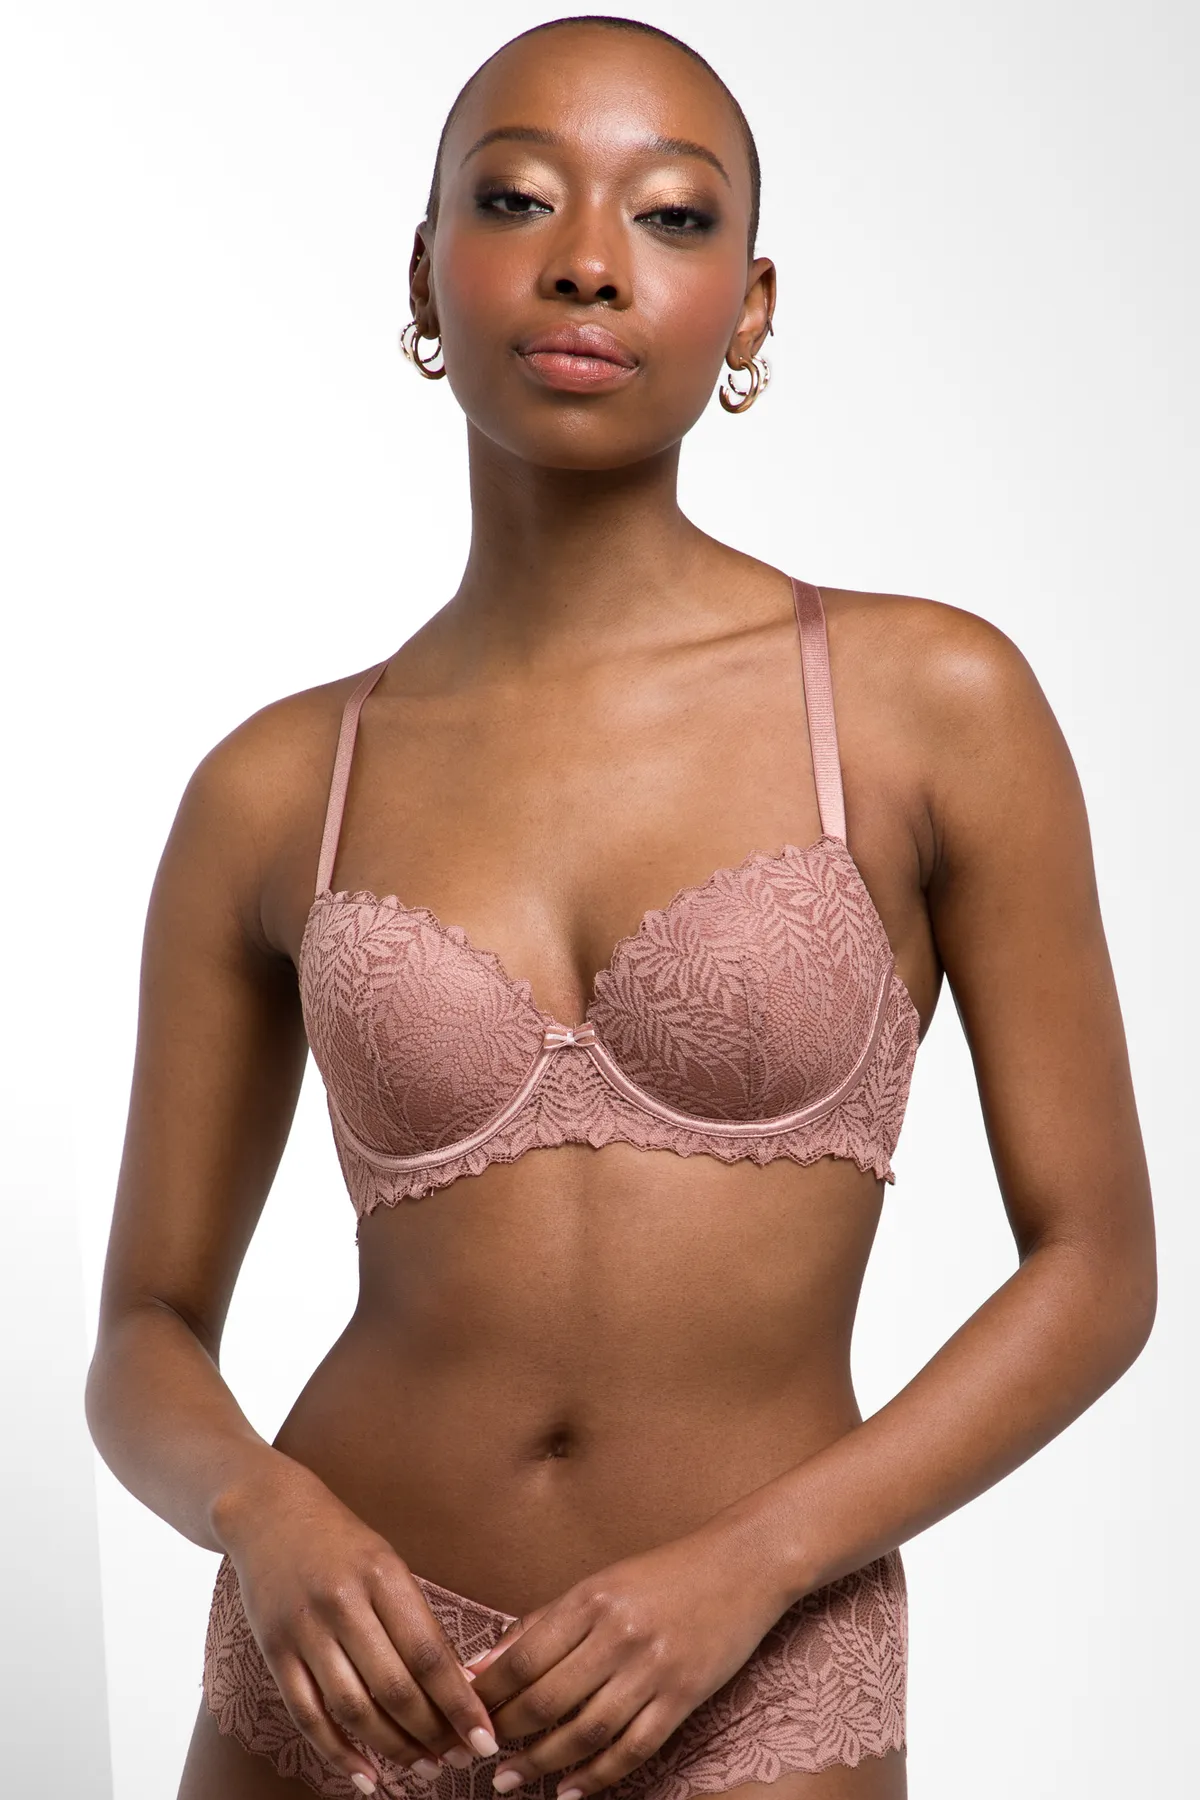 Pack of 2 Underwired Lacy Bras - Bra 